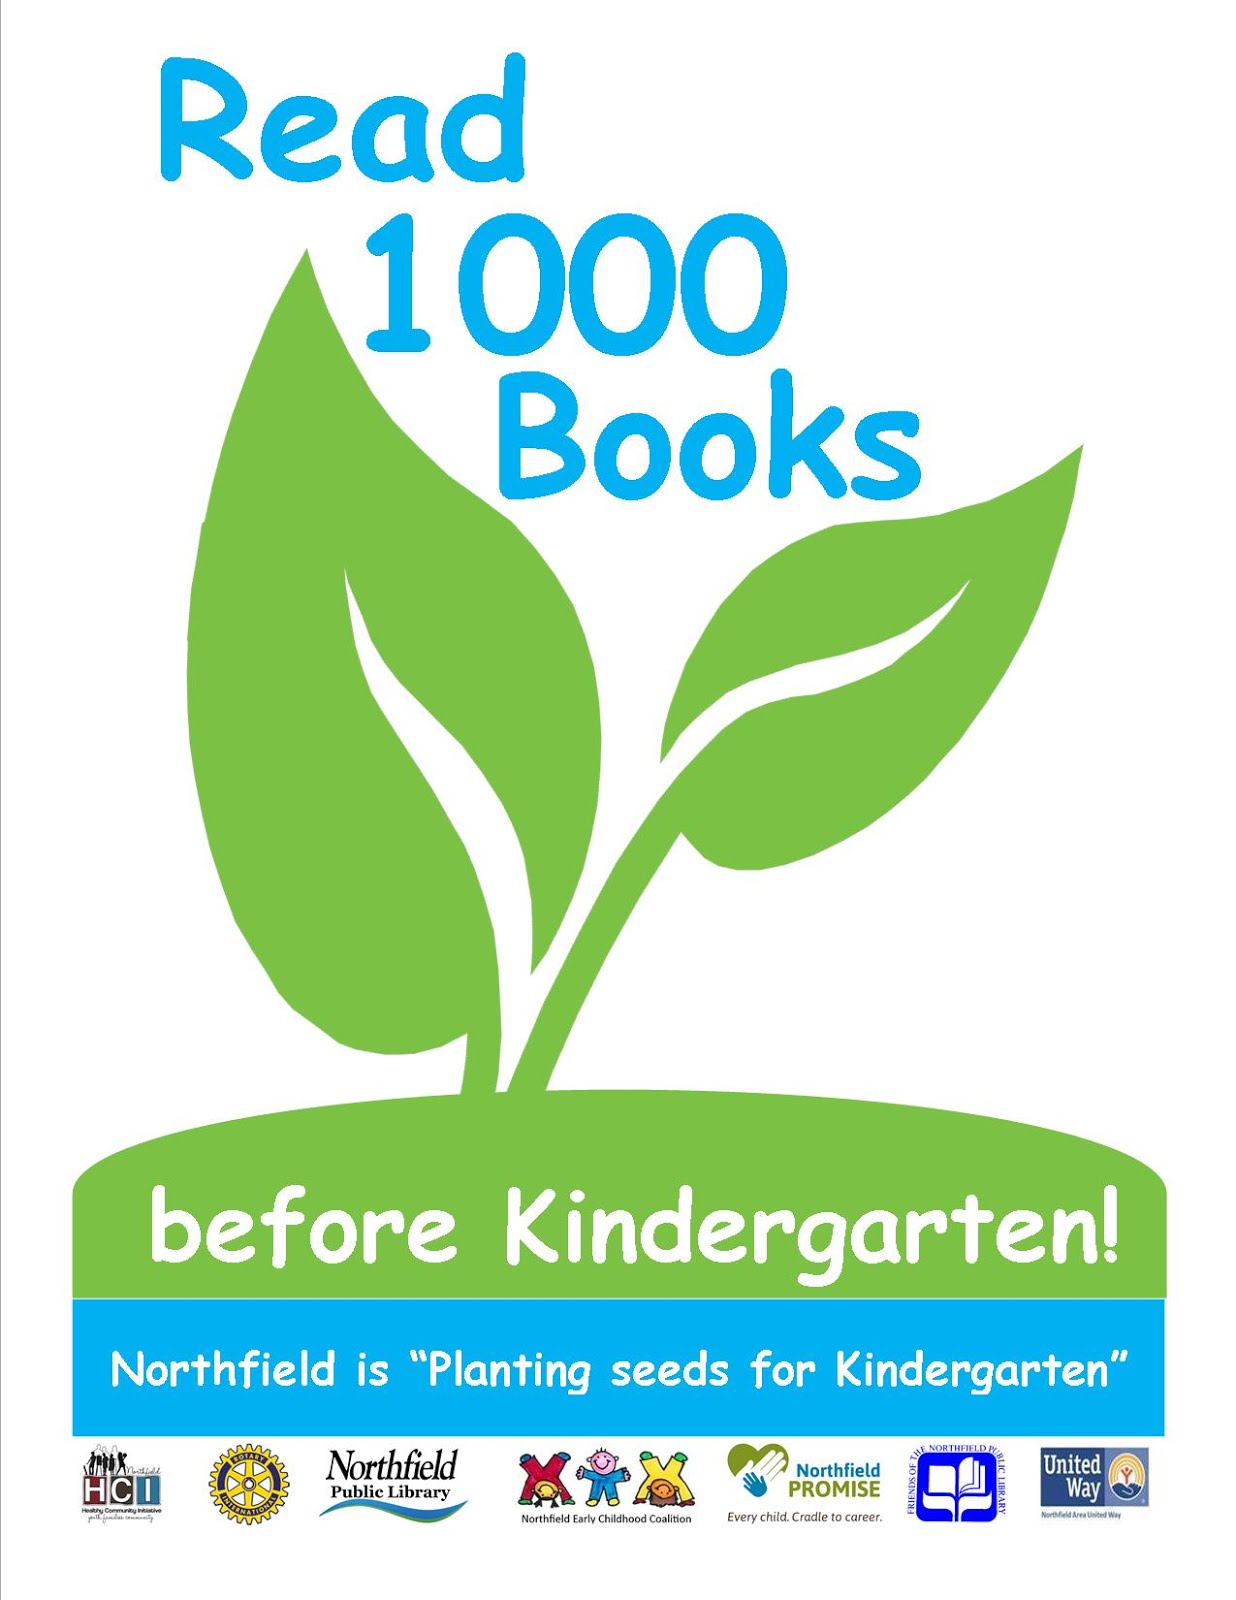 Read 1000 Books- Planting Seed for Kindergarten